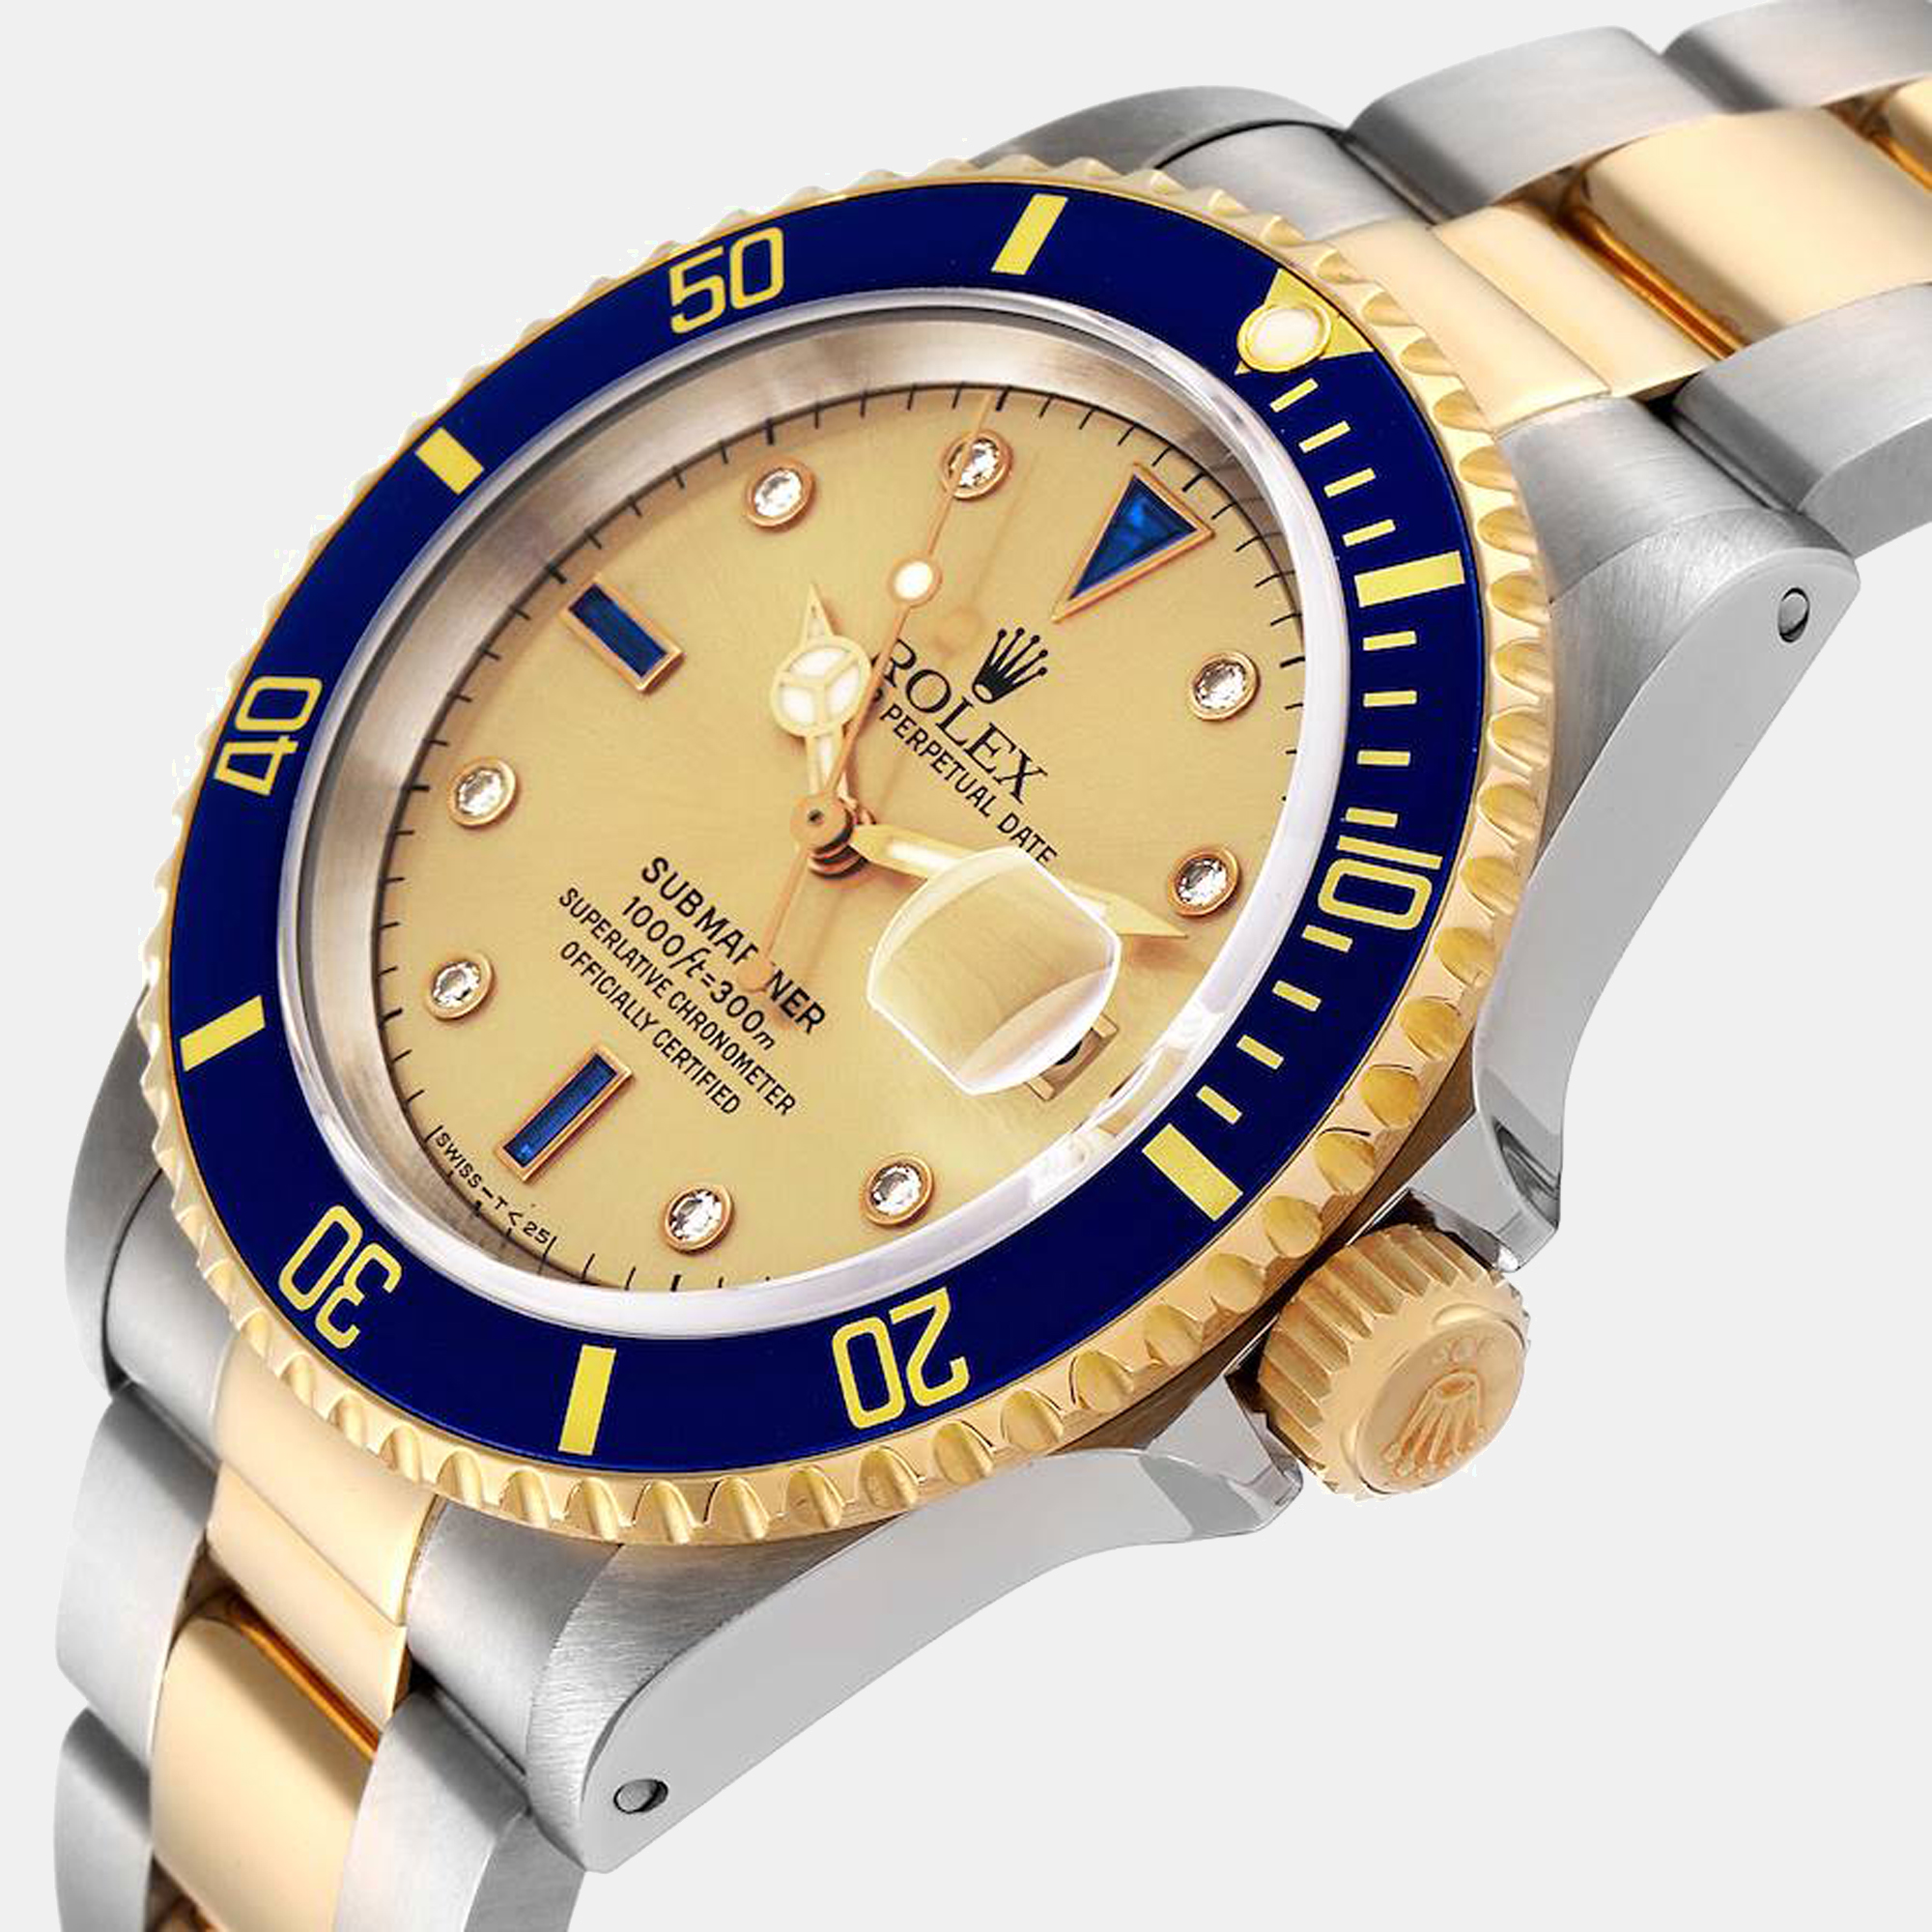 

Rolex Champagne Diamonds 18K Yellow Gold And Stainless Steel Submariner 16613 Men's Wristwatch 40 mm